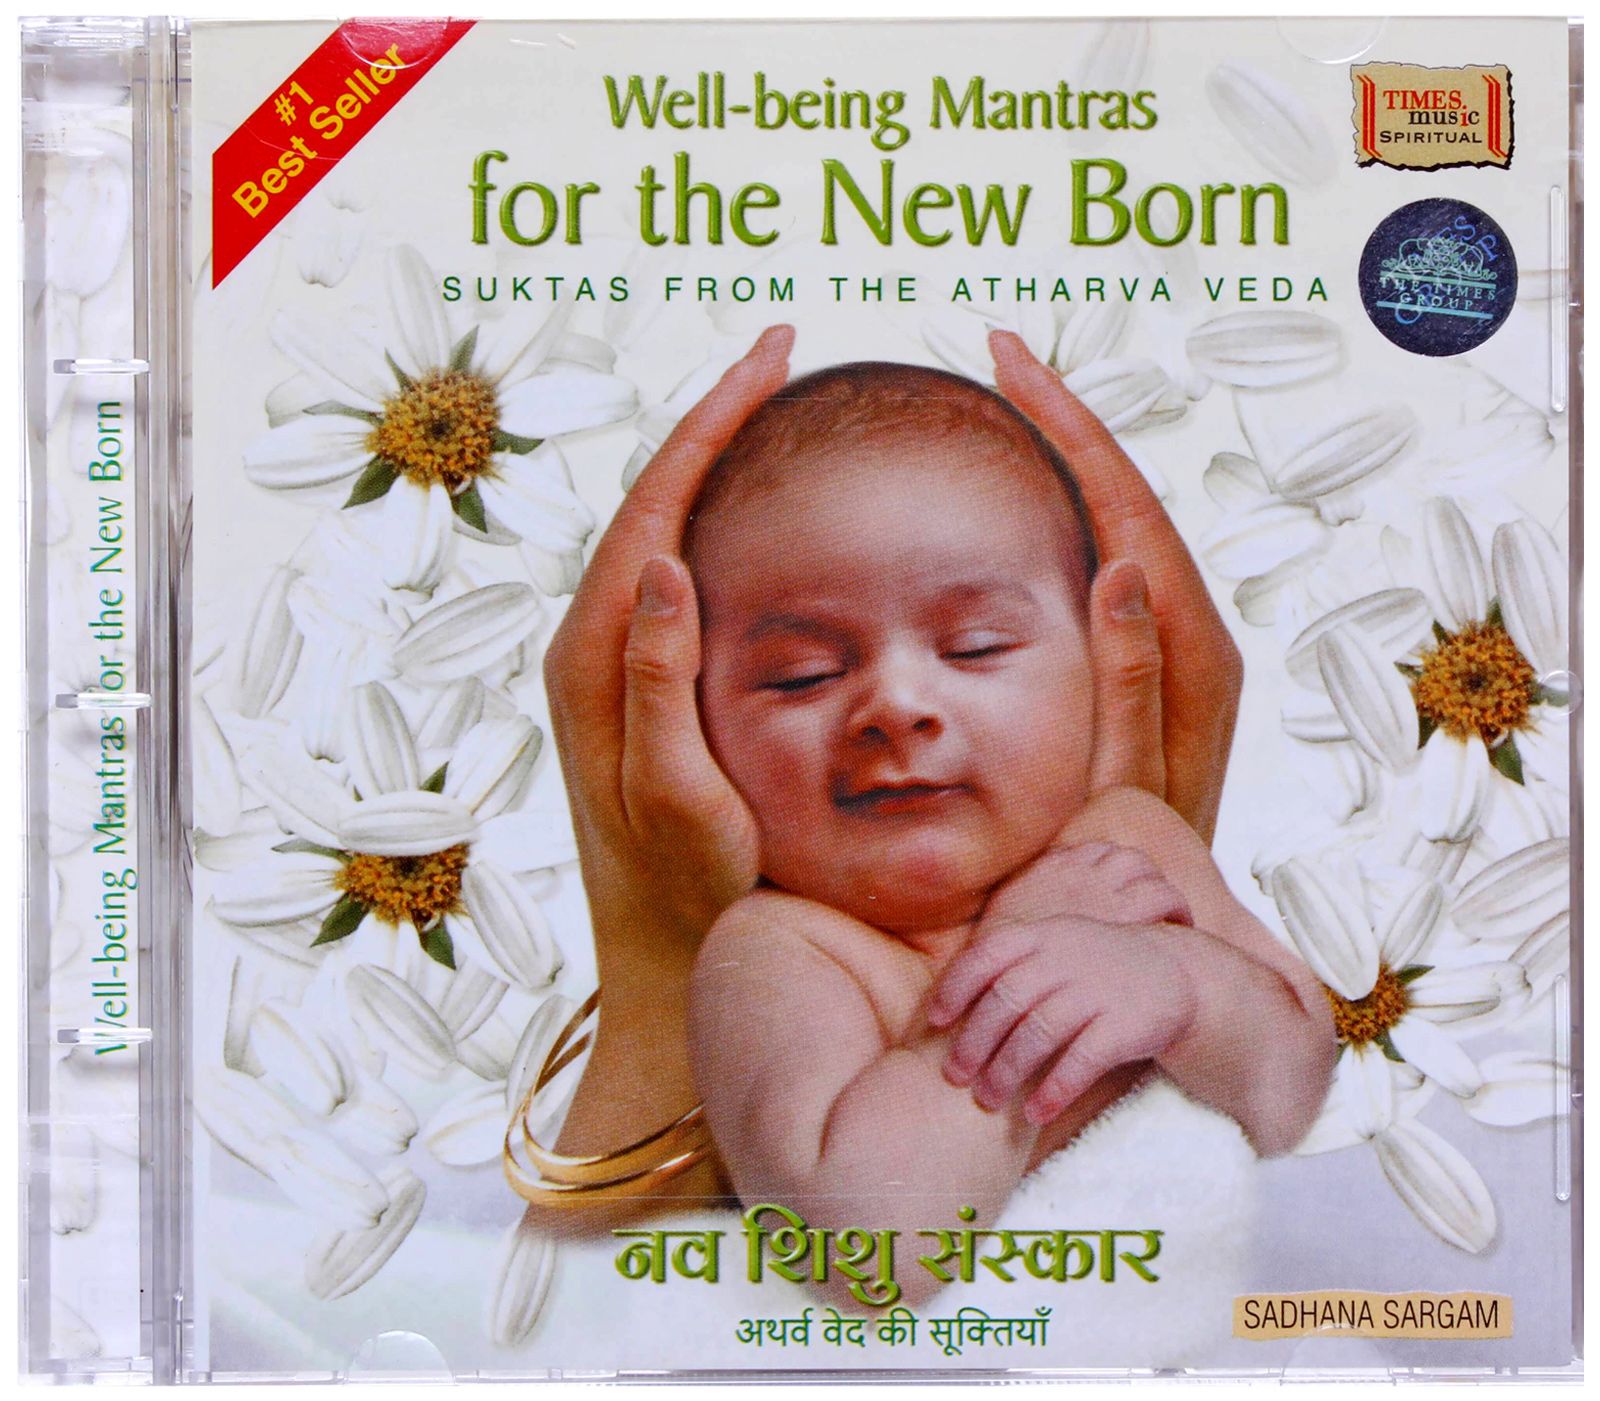 Times Music - Well Being Mantras For The New Born CD